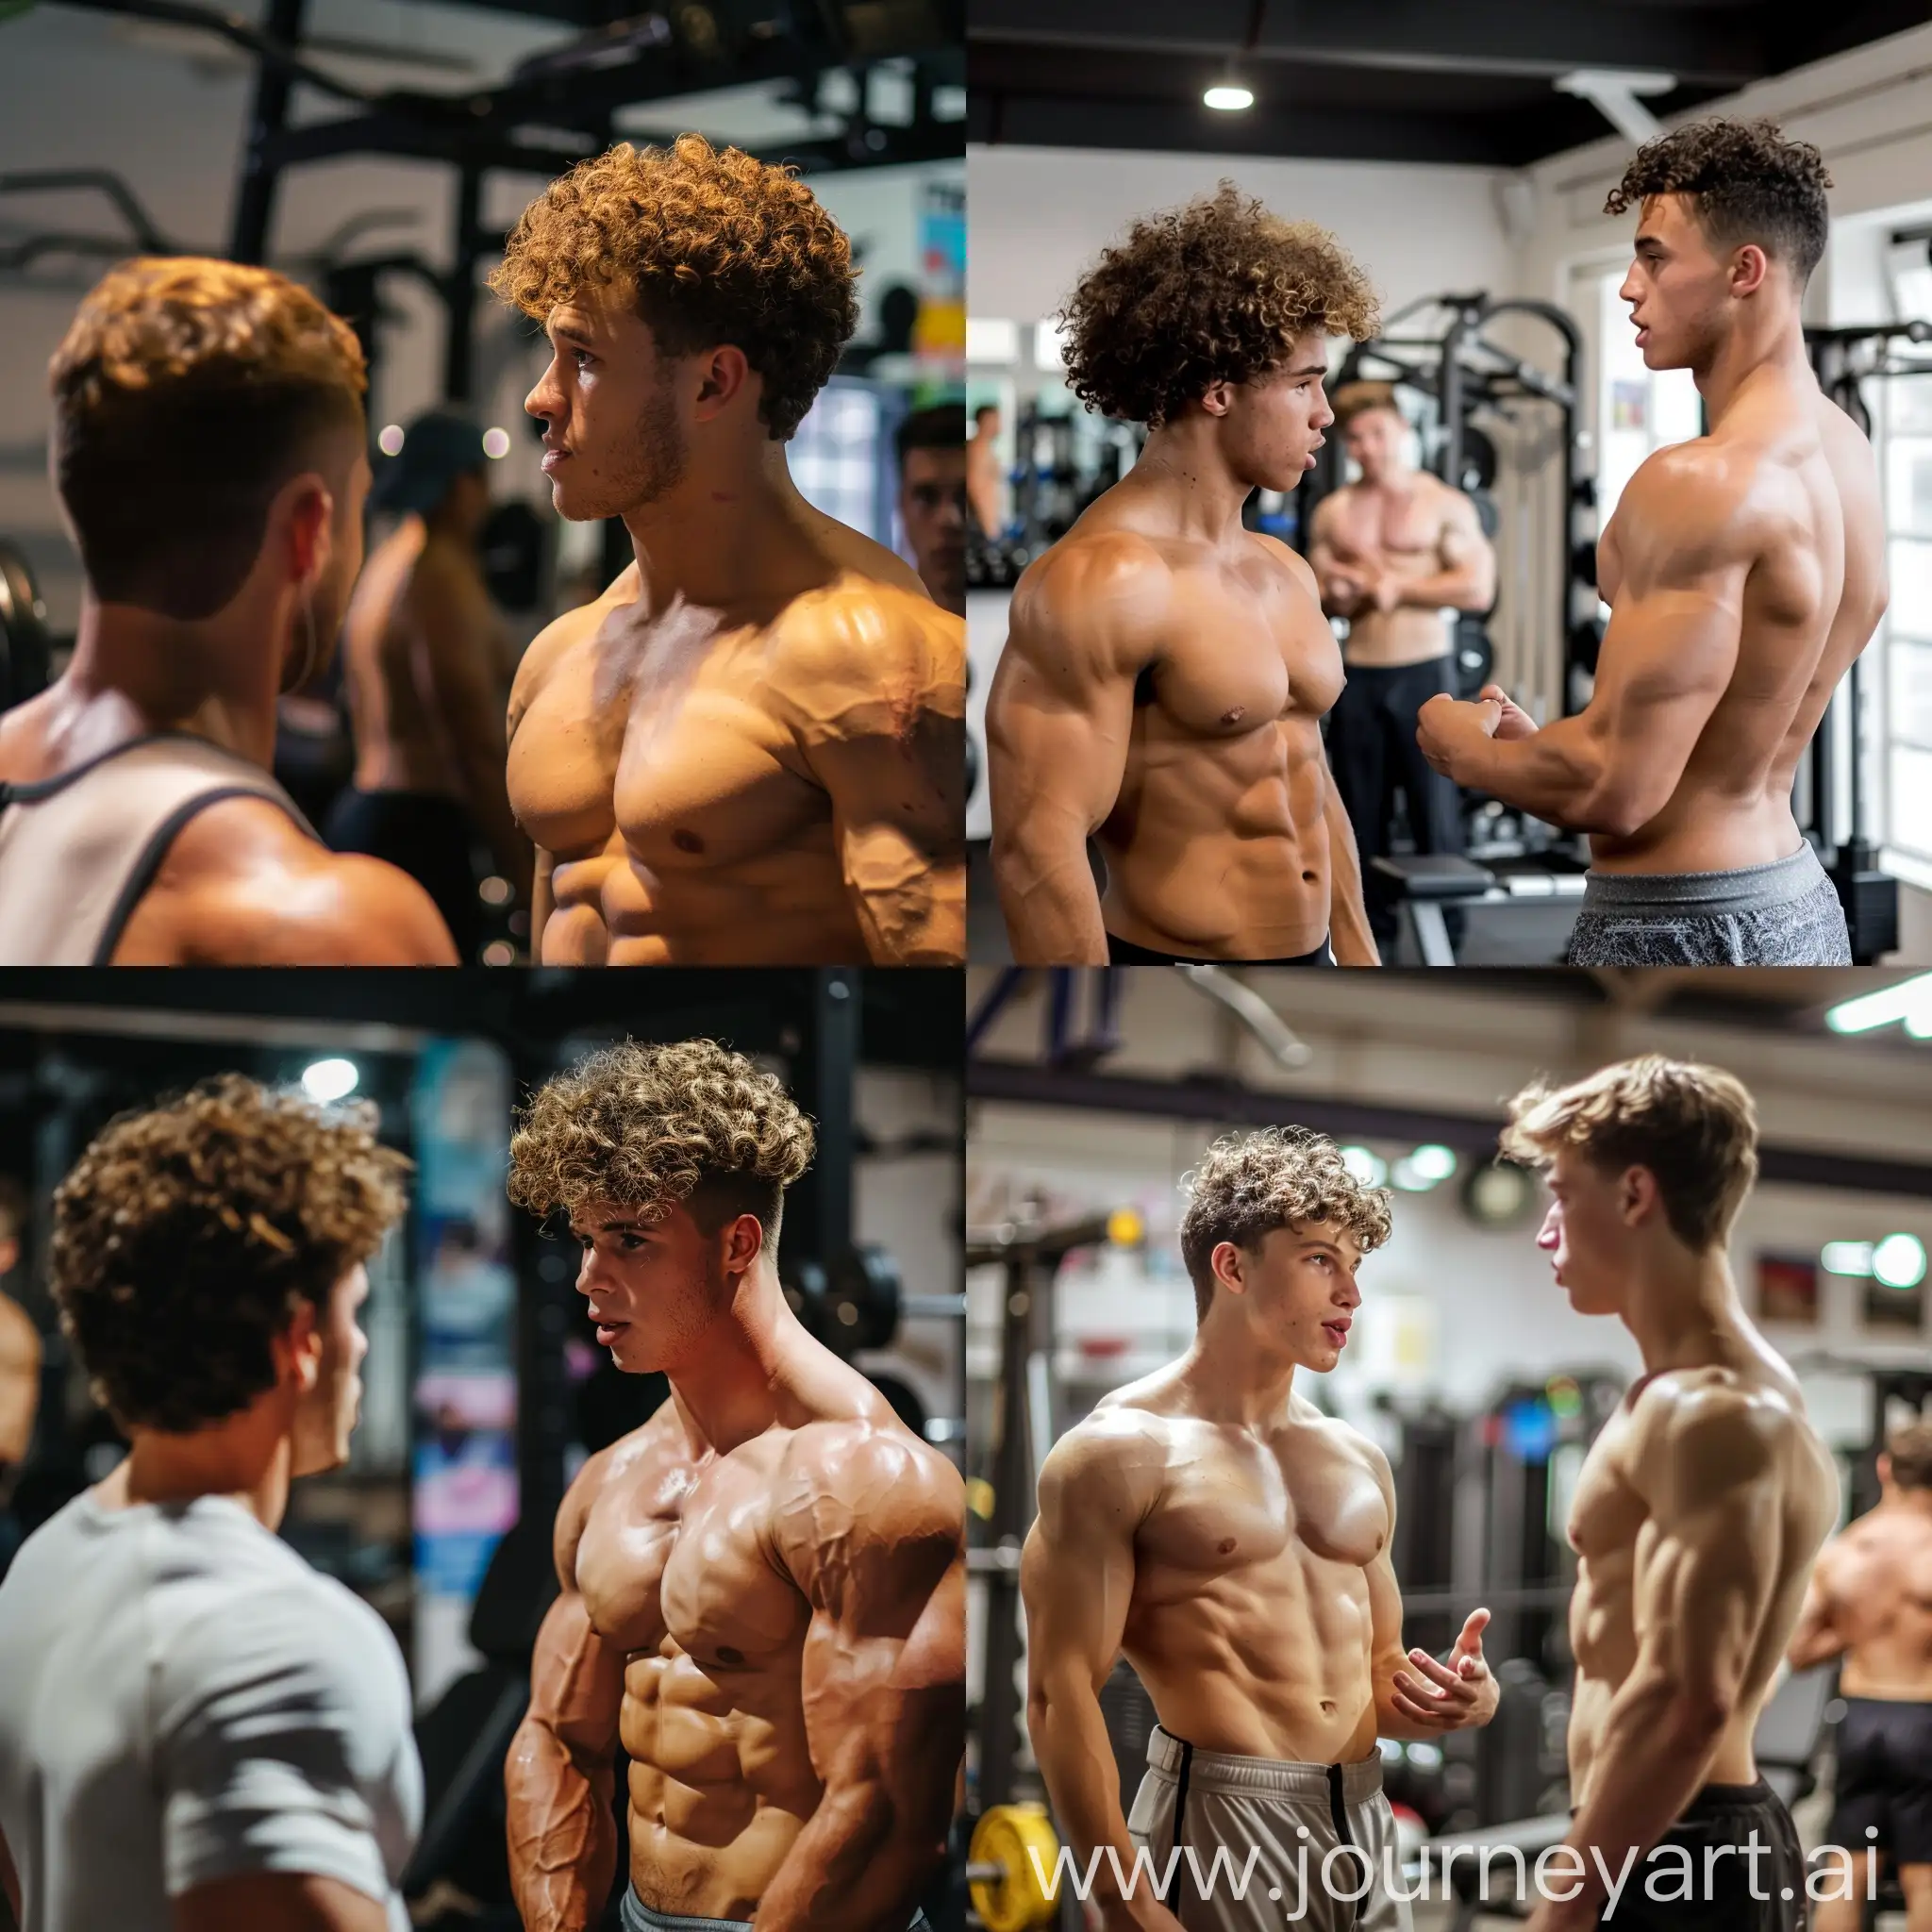 Curly-Haired-Muscular-Boy-Discussing-Workout-Techniques-with-Shirtless-Men-in-Gym